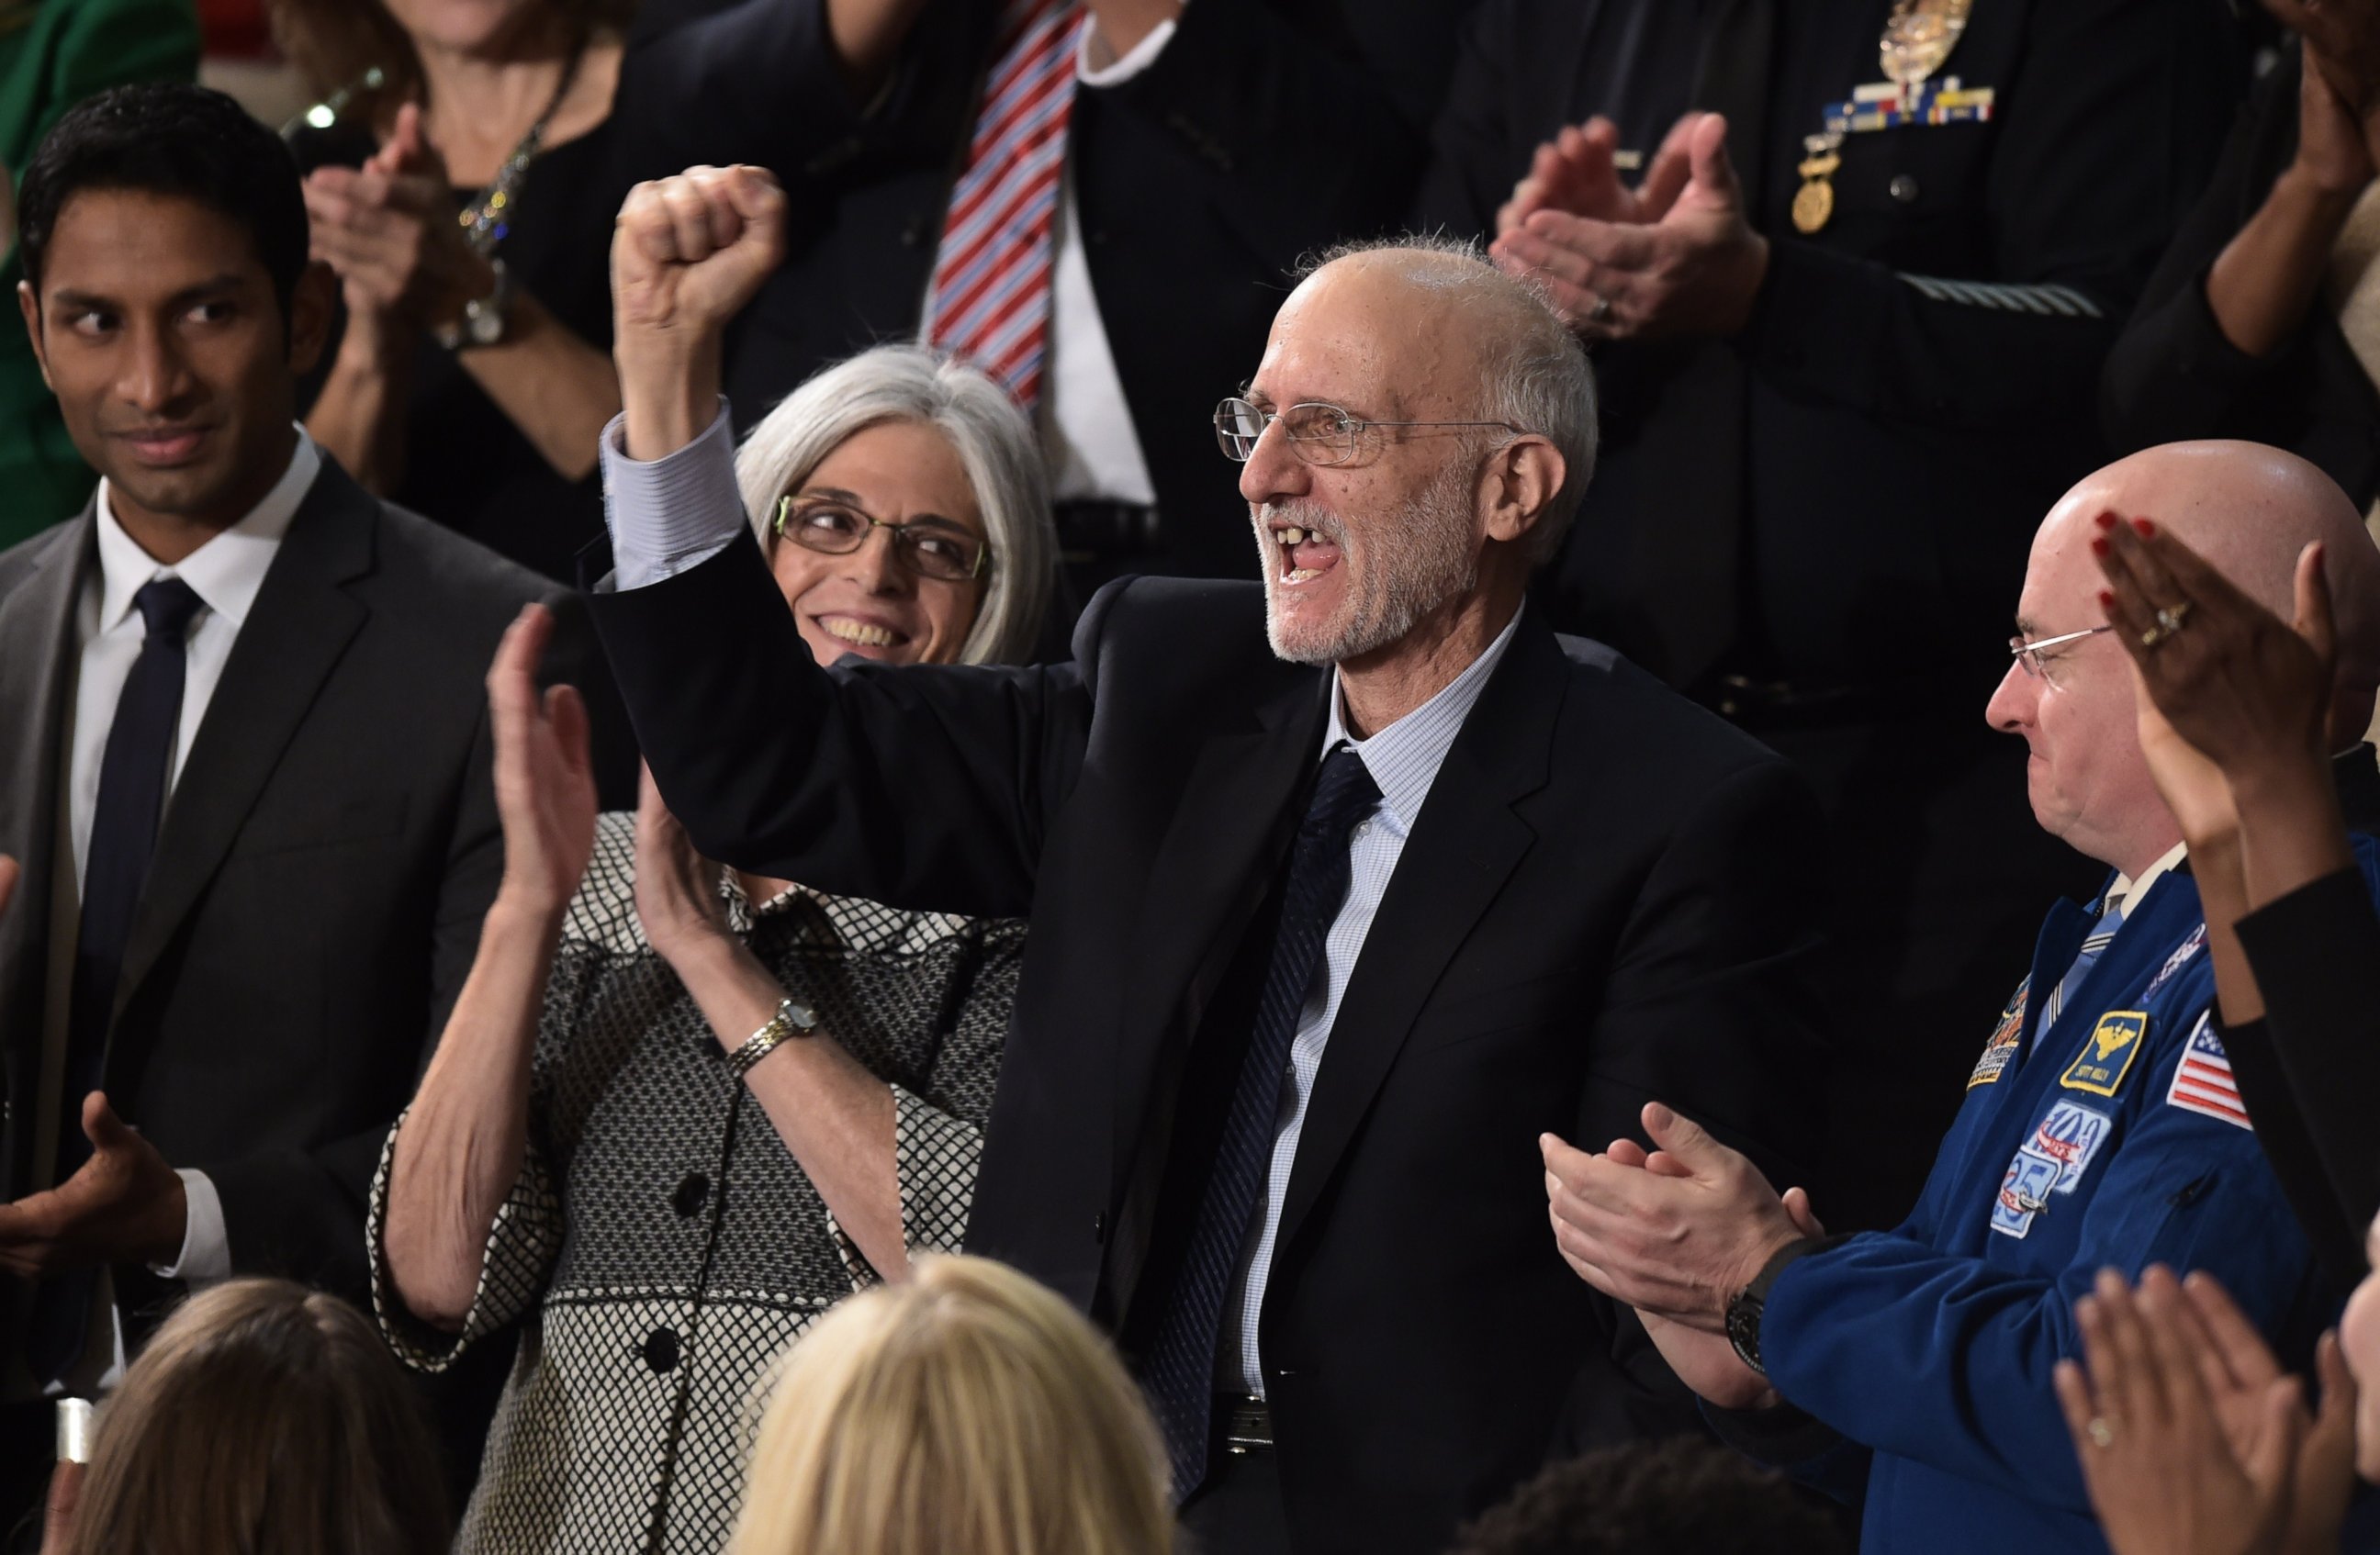 PHOTO: Alan Gross, the U.S. contractor released from prison in Cuba last month, is applauded during US President Barack Obama's State of the Union address in Washington on Jan. 20, 2015.